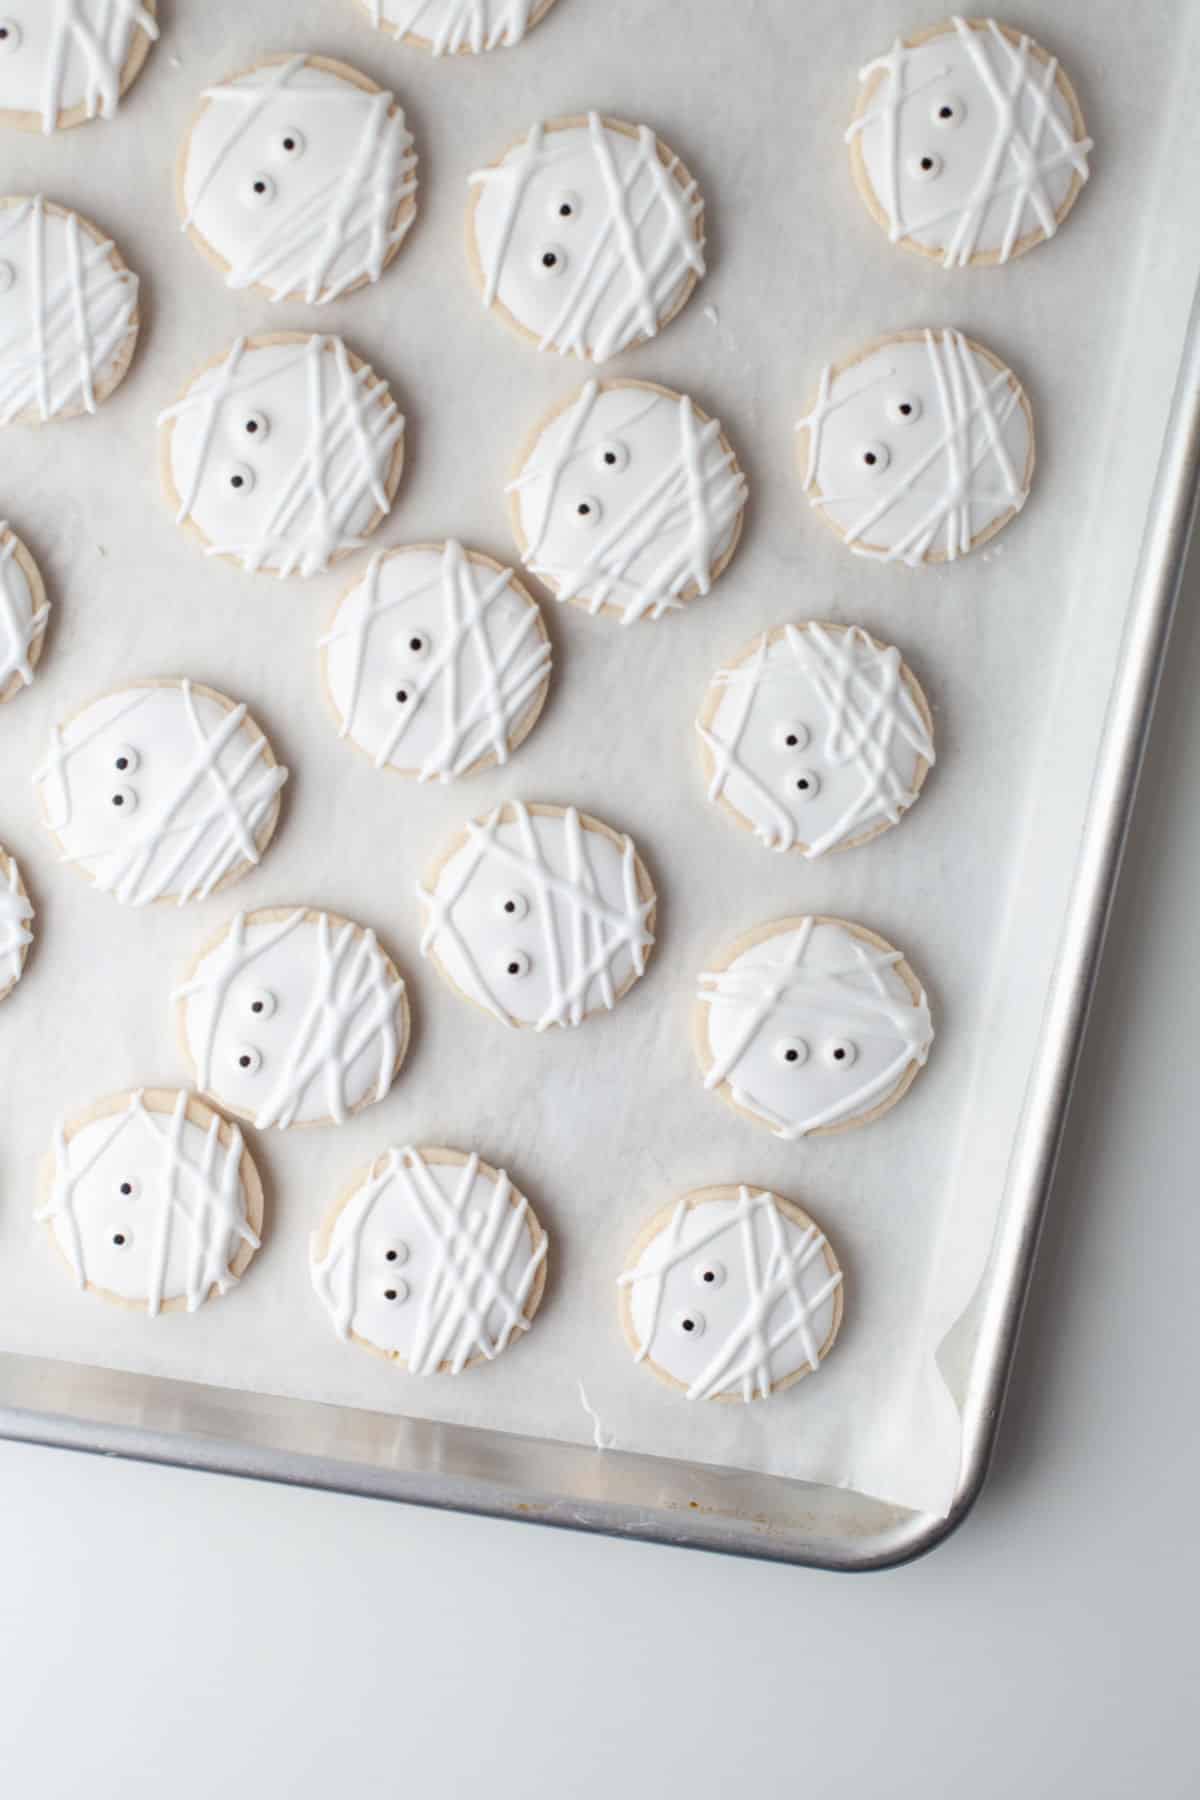 Mummy sugar cookies on a parchment paper lined tray.